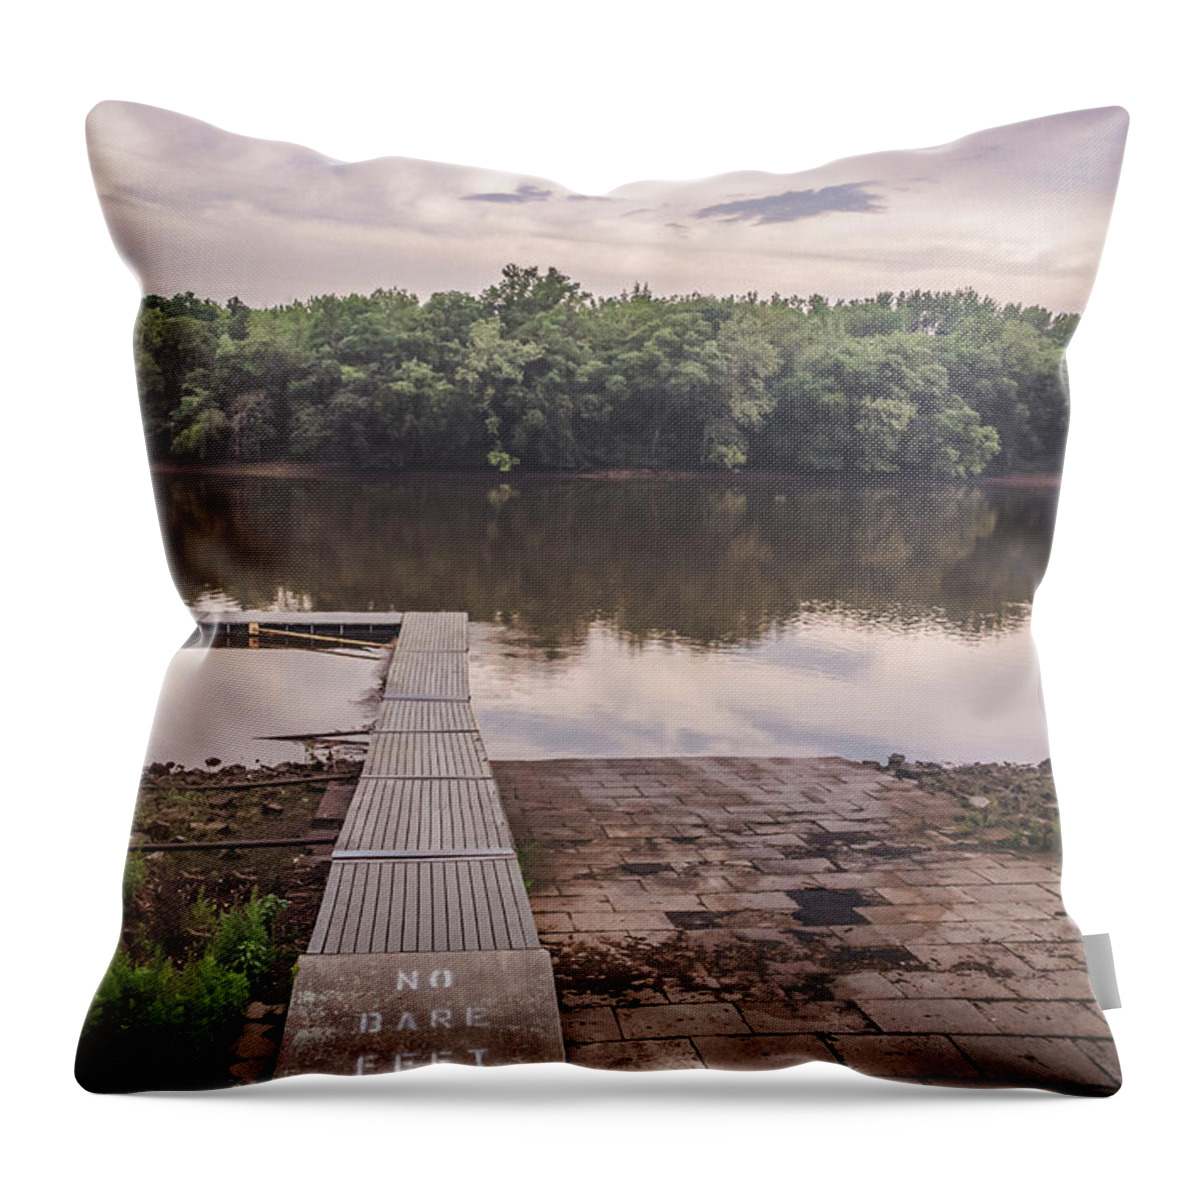 Boat Ramp Throw Pillow featuring the photograph No Bare Feet by Steve Stanger